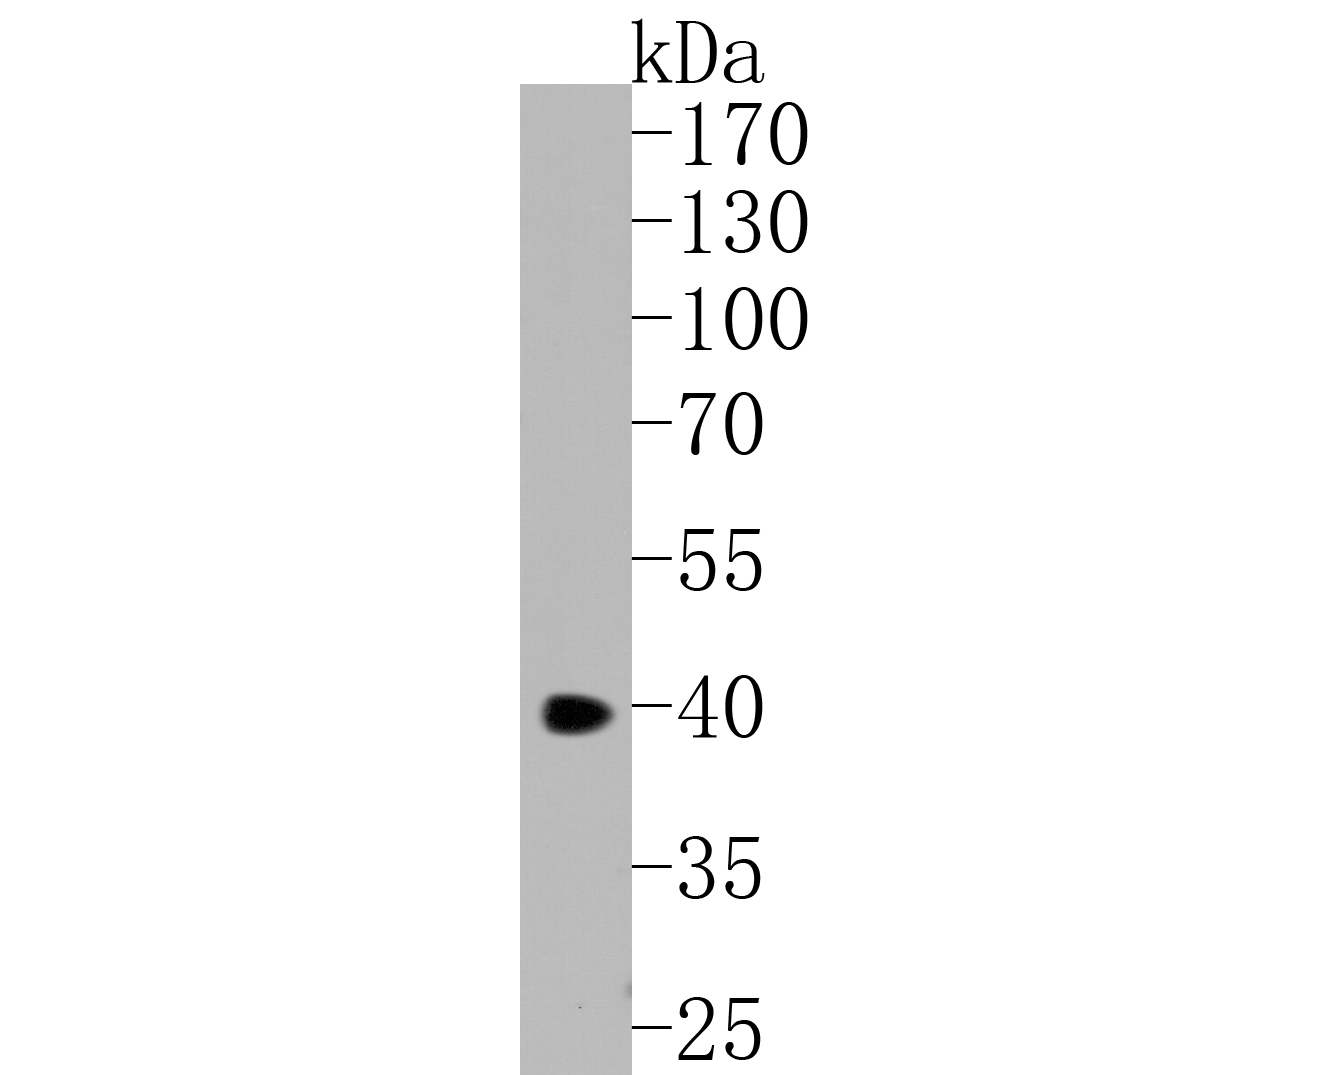 Western blot analysis of YKL-40 on THP-1 cell lysates. Proteins were transferred to a PVDF membrane and blocked with 5% NFDM/TBST for 1 hour at room temperature. The primary antibody (HA600075, 1/500) was used in 5% NFDM/TBST at room temperature for 2 hours. Goat Anti-Mouse IgG - HRP Secondary Antibody (HA1006) at 1:5,000 dilution was used for 1 hour at room temperature.